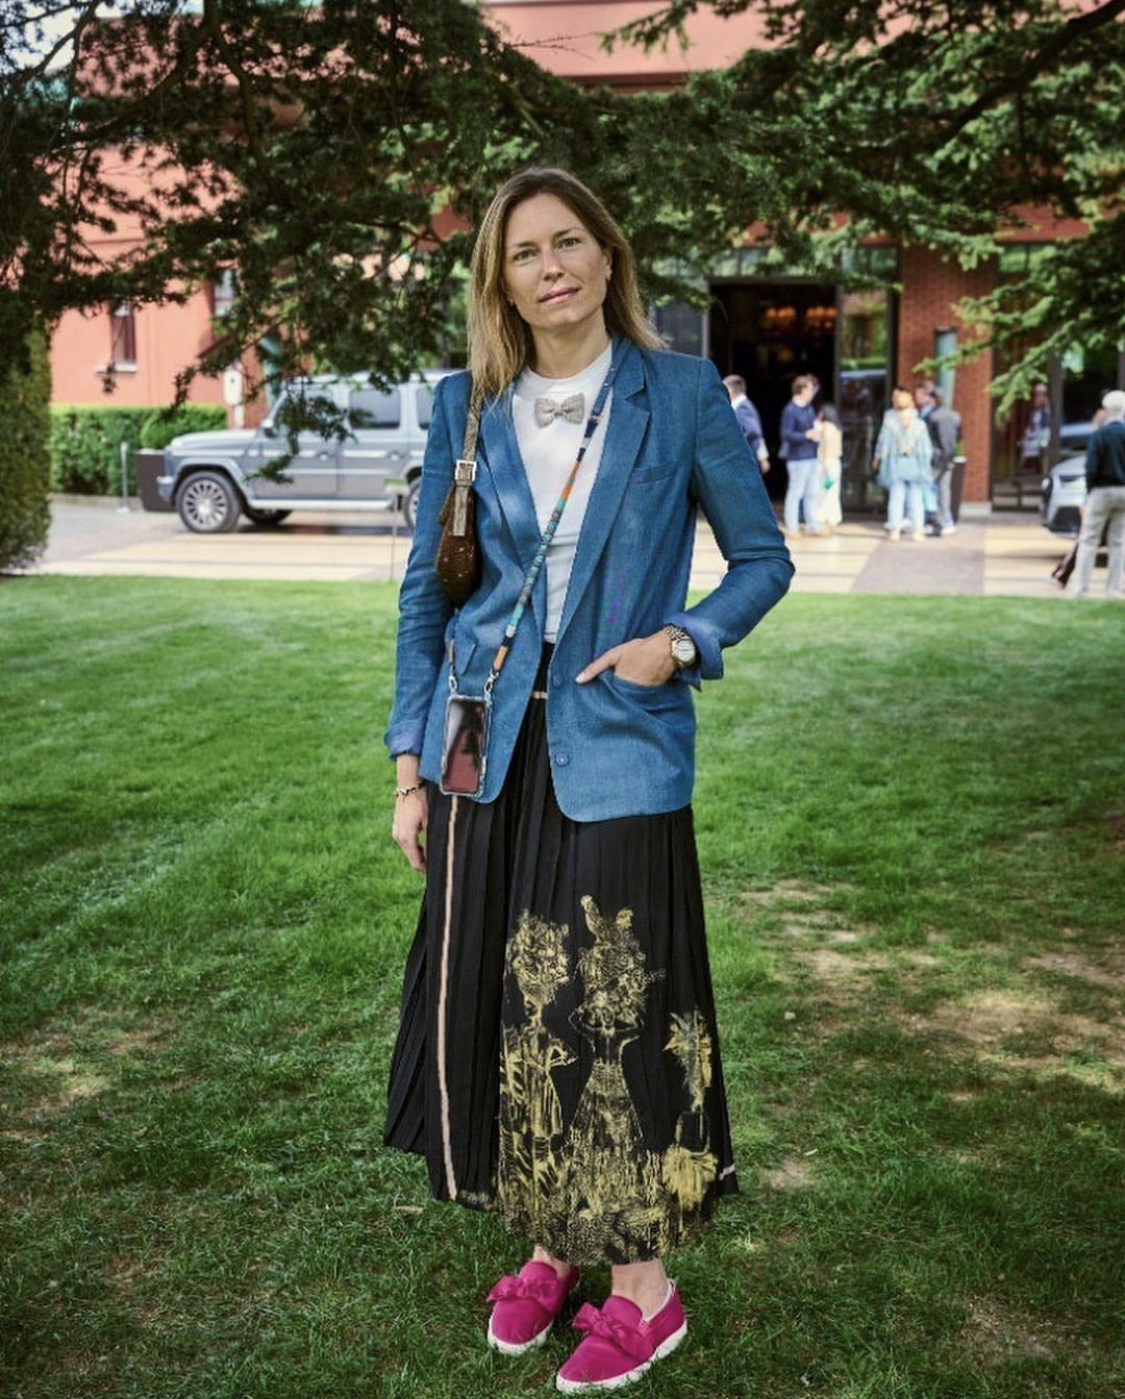 Camille Guille spotted by Hodinkee at the Spring Geneva Auctions on May 2023